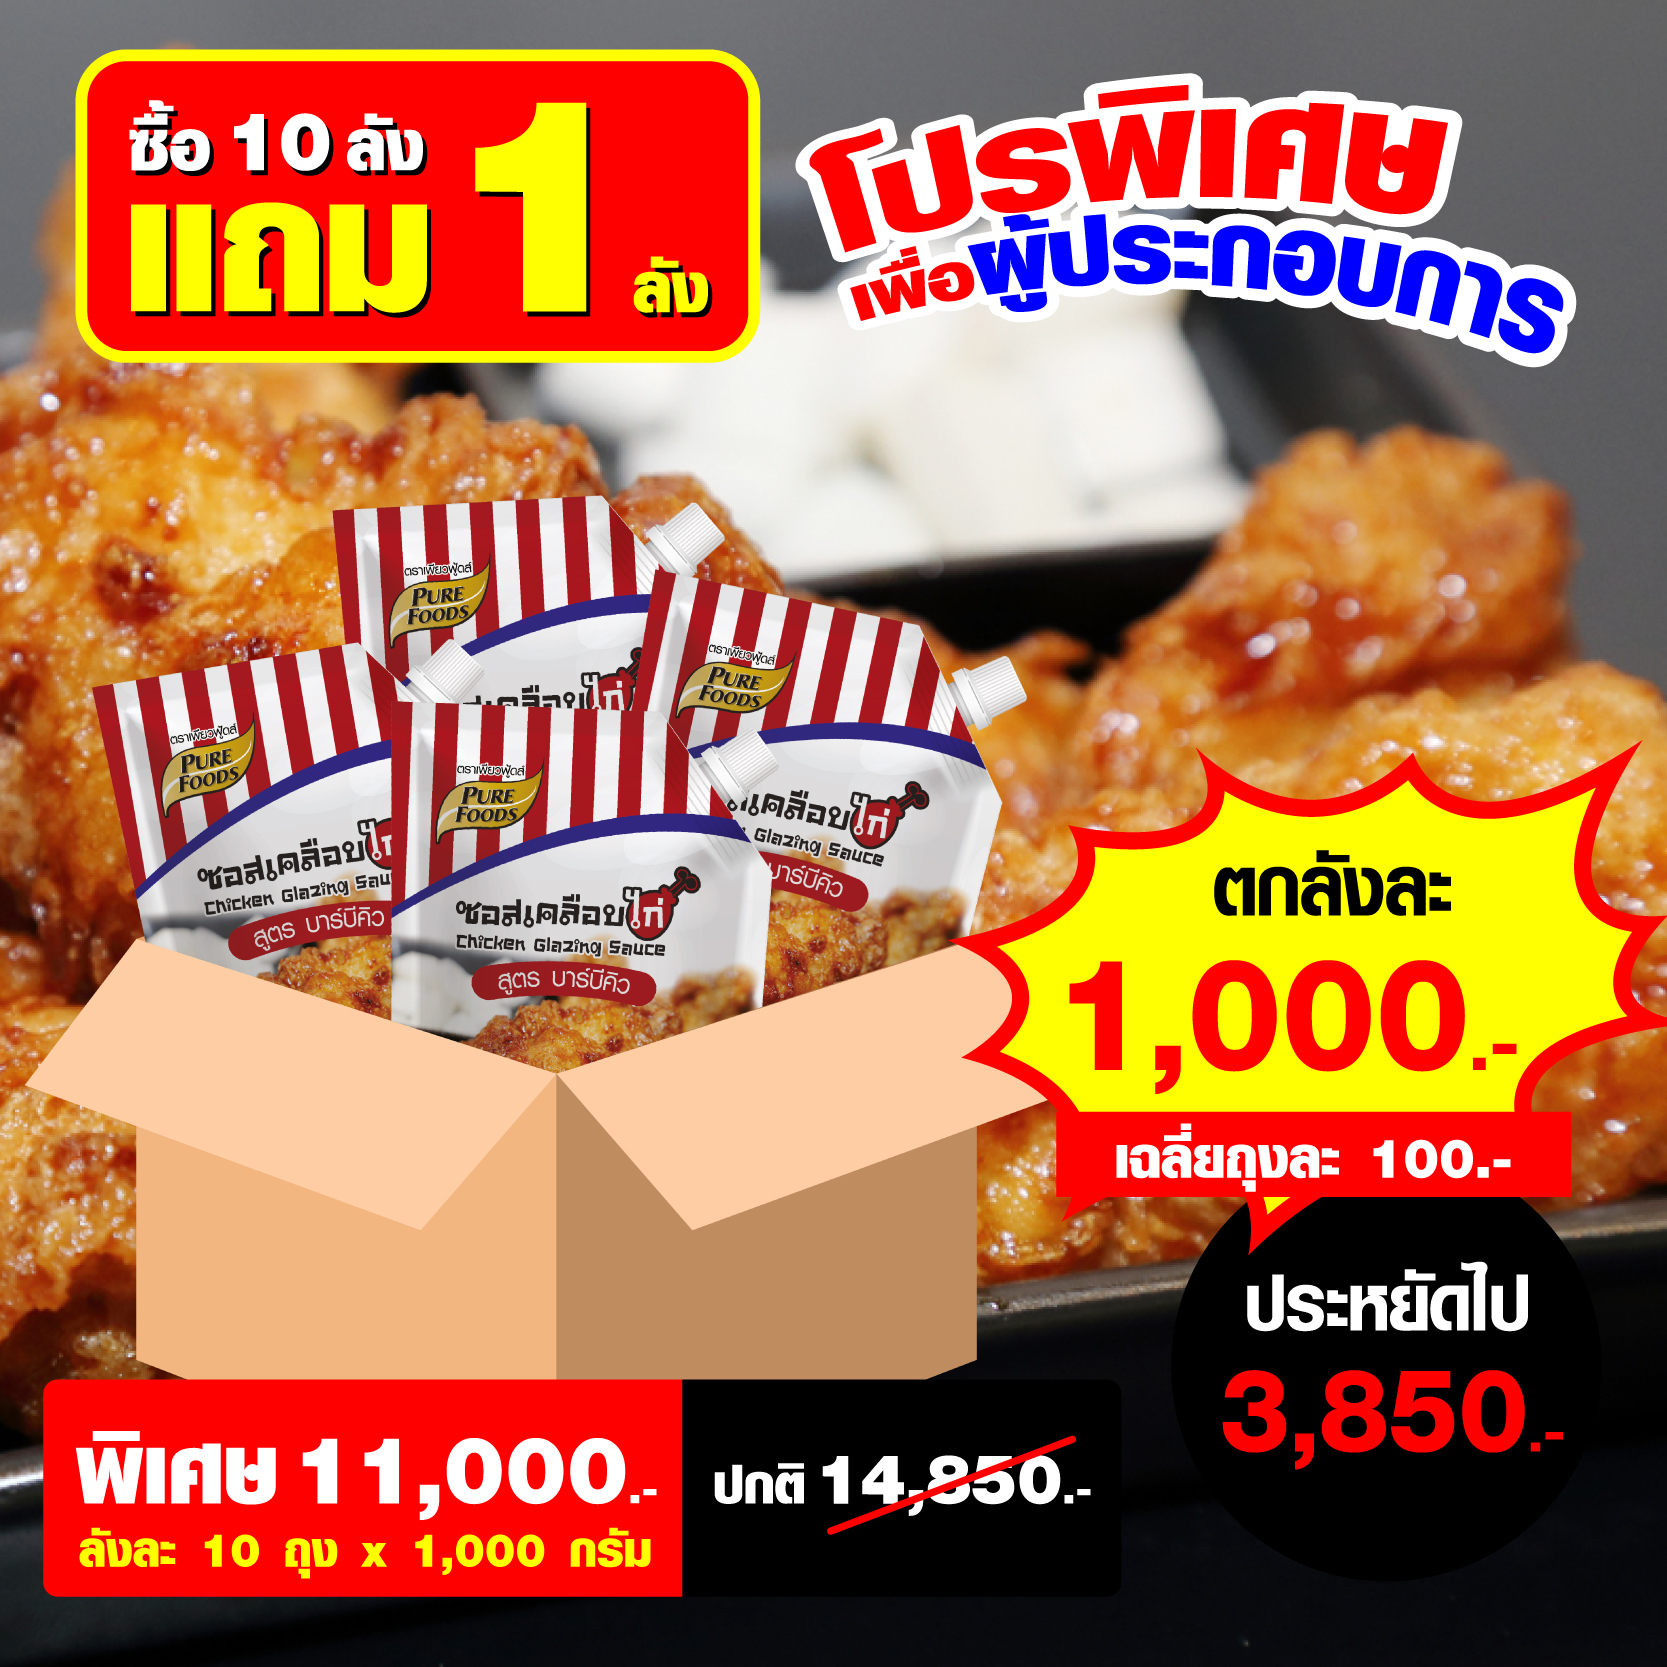 Chicken glazing sauce  with BBQ flavor 1000 g.  (wholesale price order buy 10 boxes get 1 free)